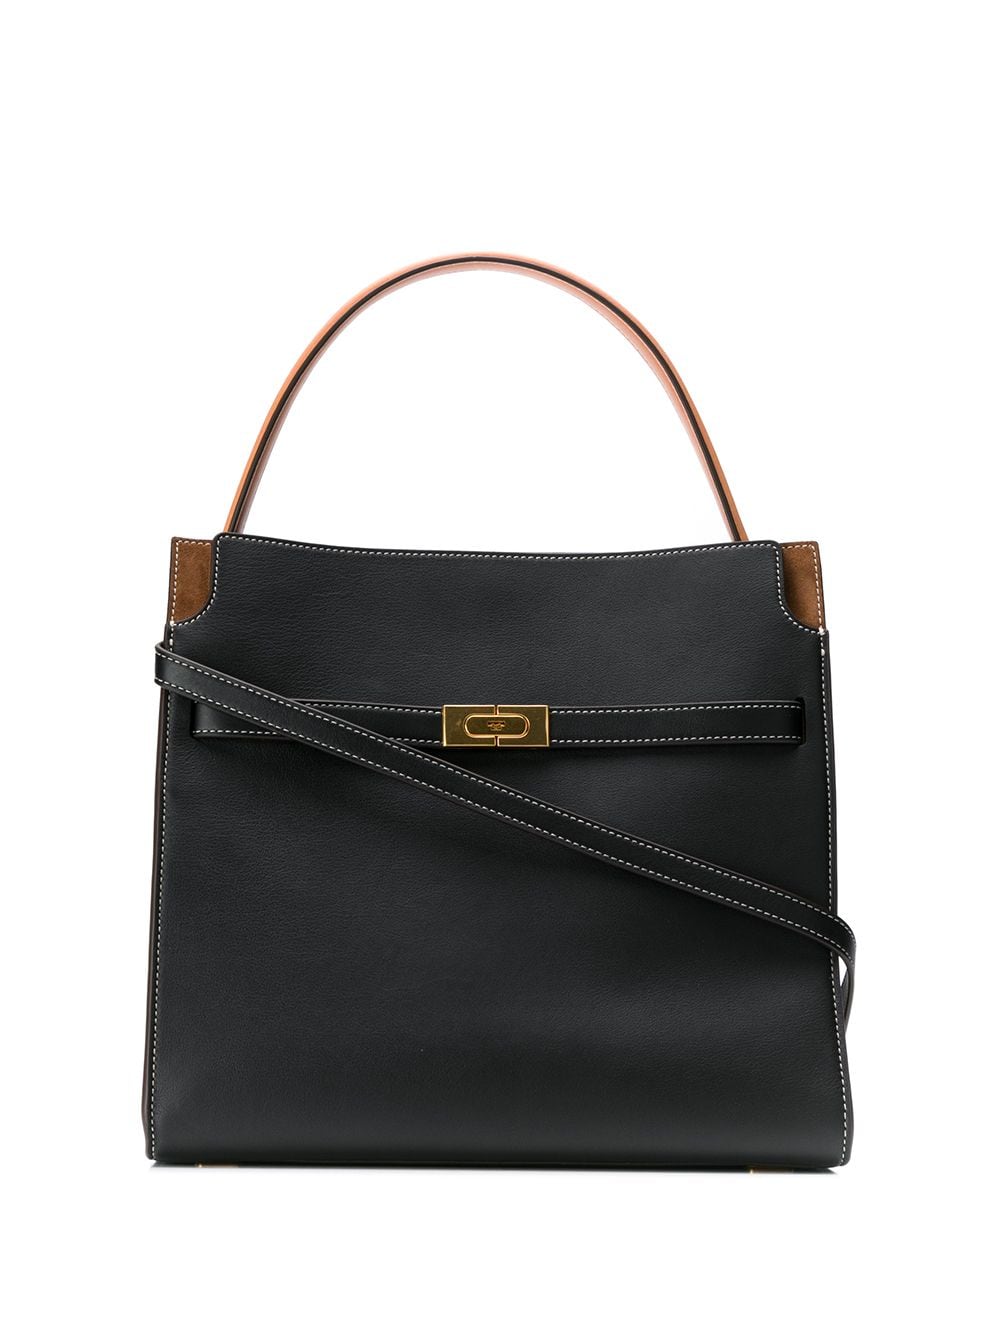 Image 1 of Tory Burch LEE RADZIWILL DOUBLE BAG